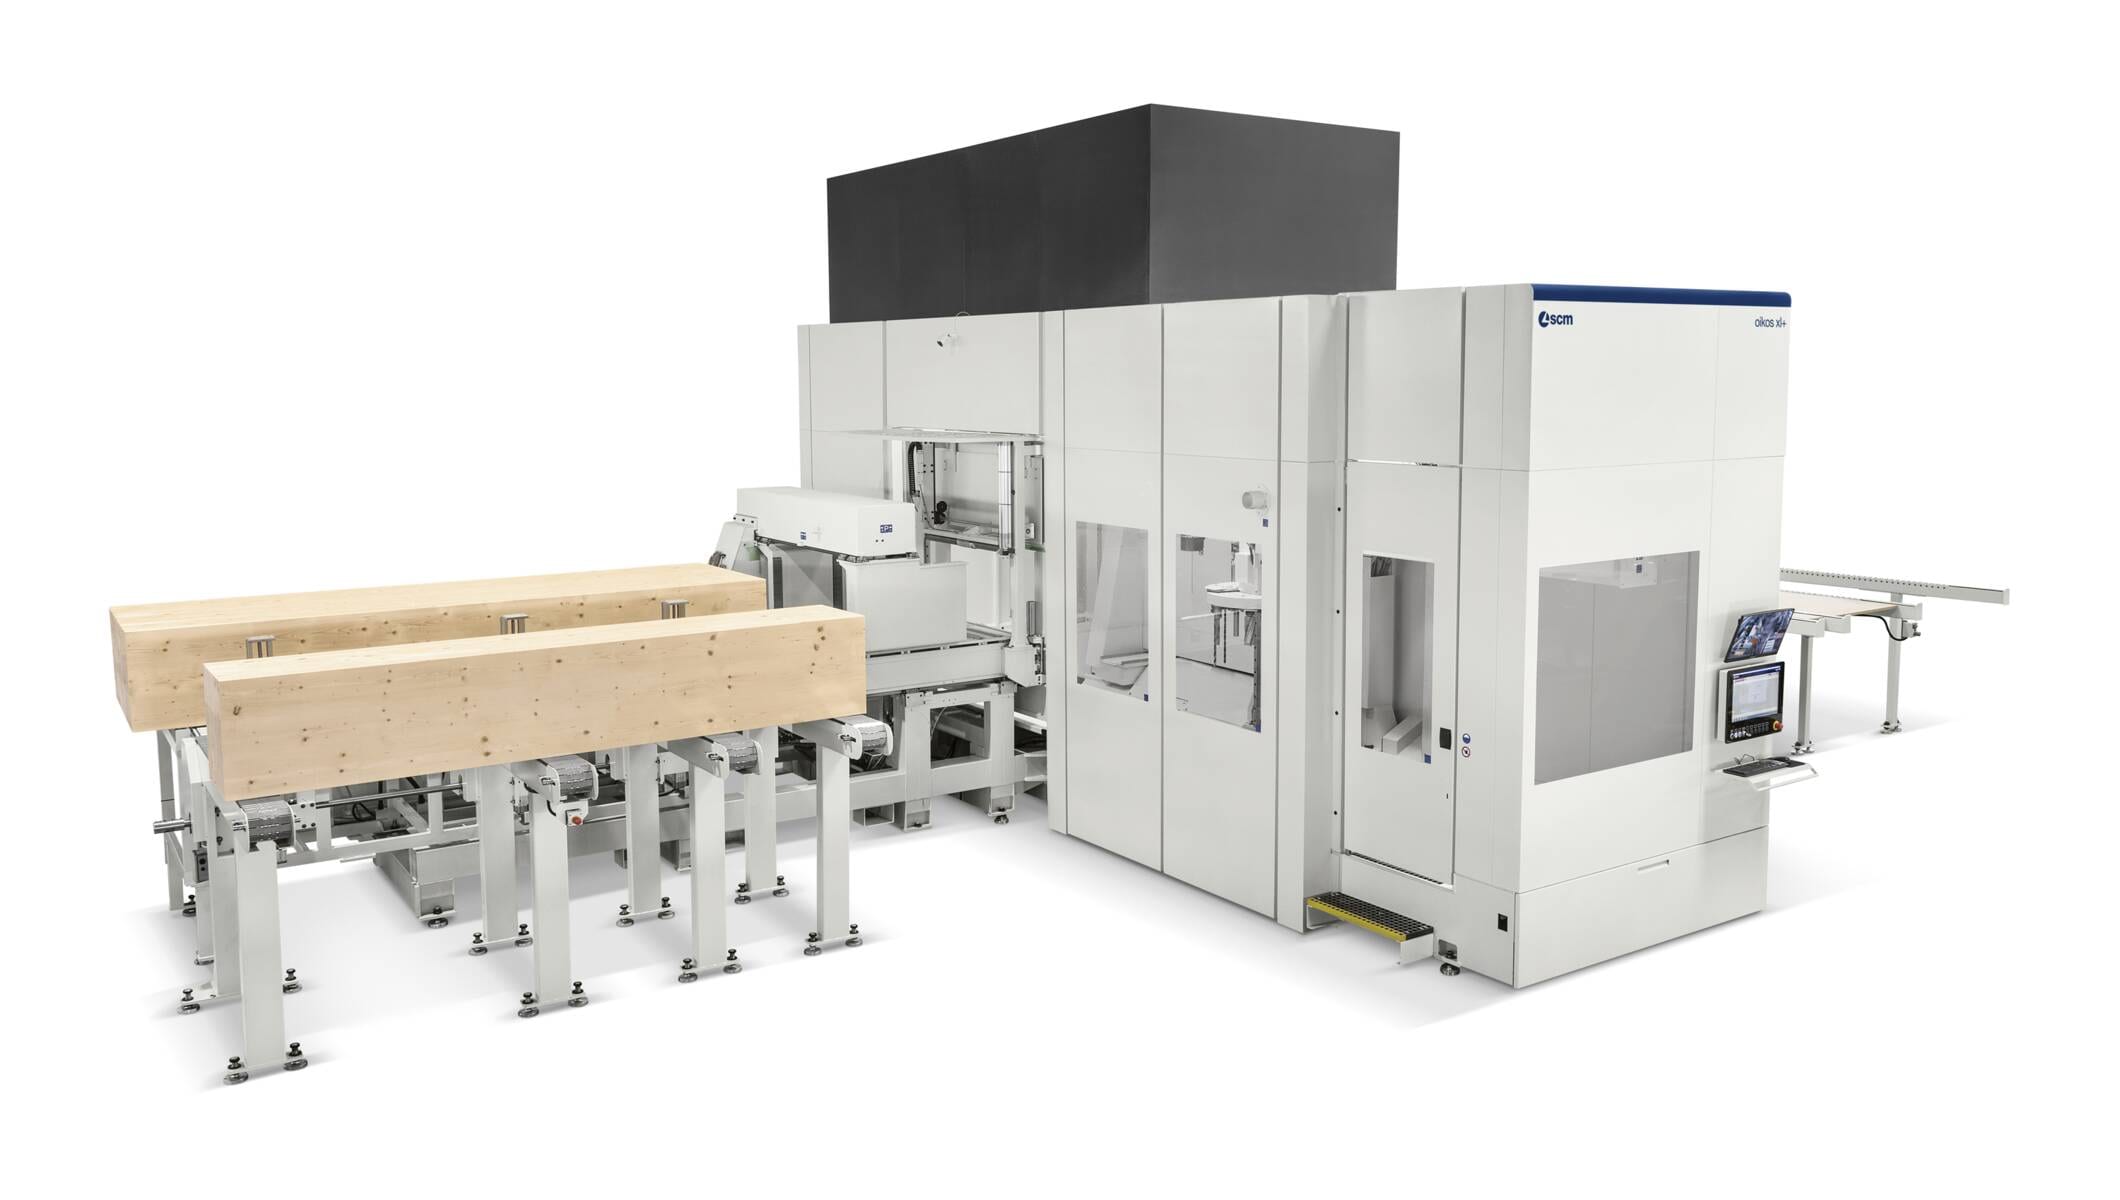 Systems for timber construction - CNC Machining Centres for timber construction - oikos xl+